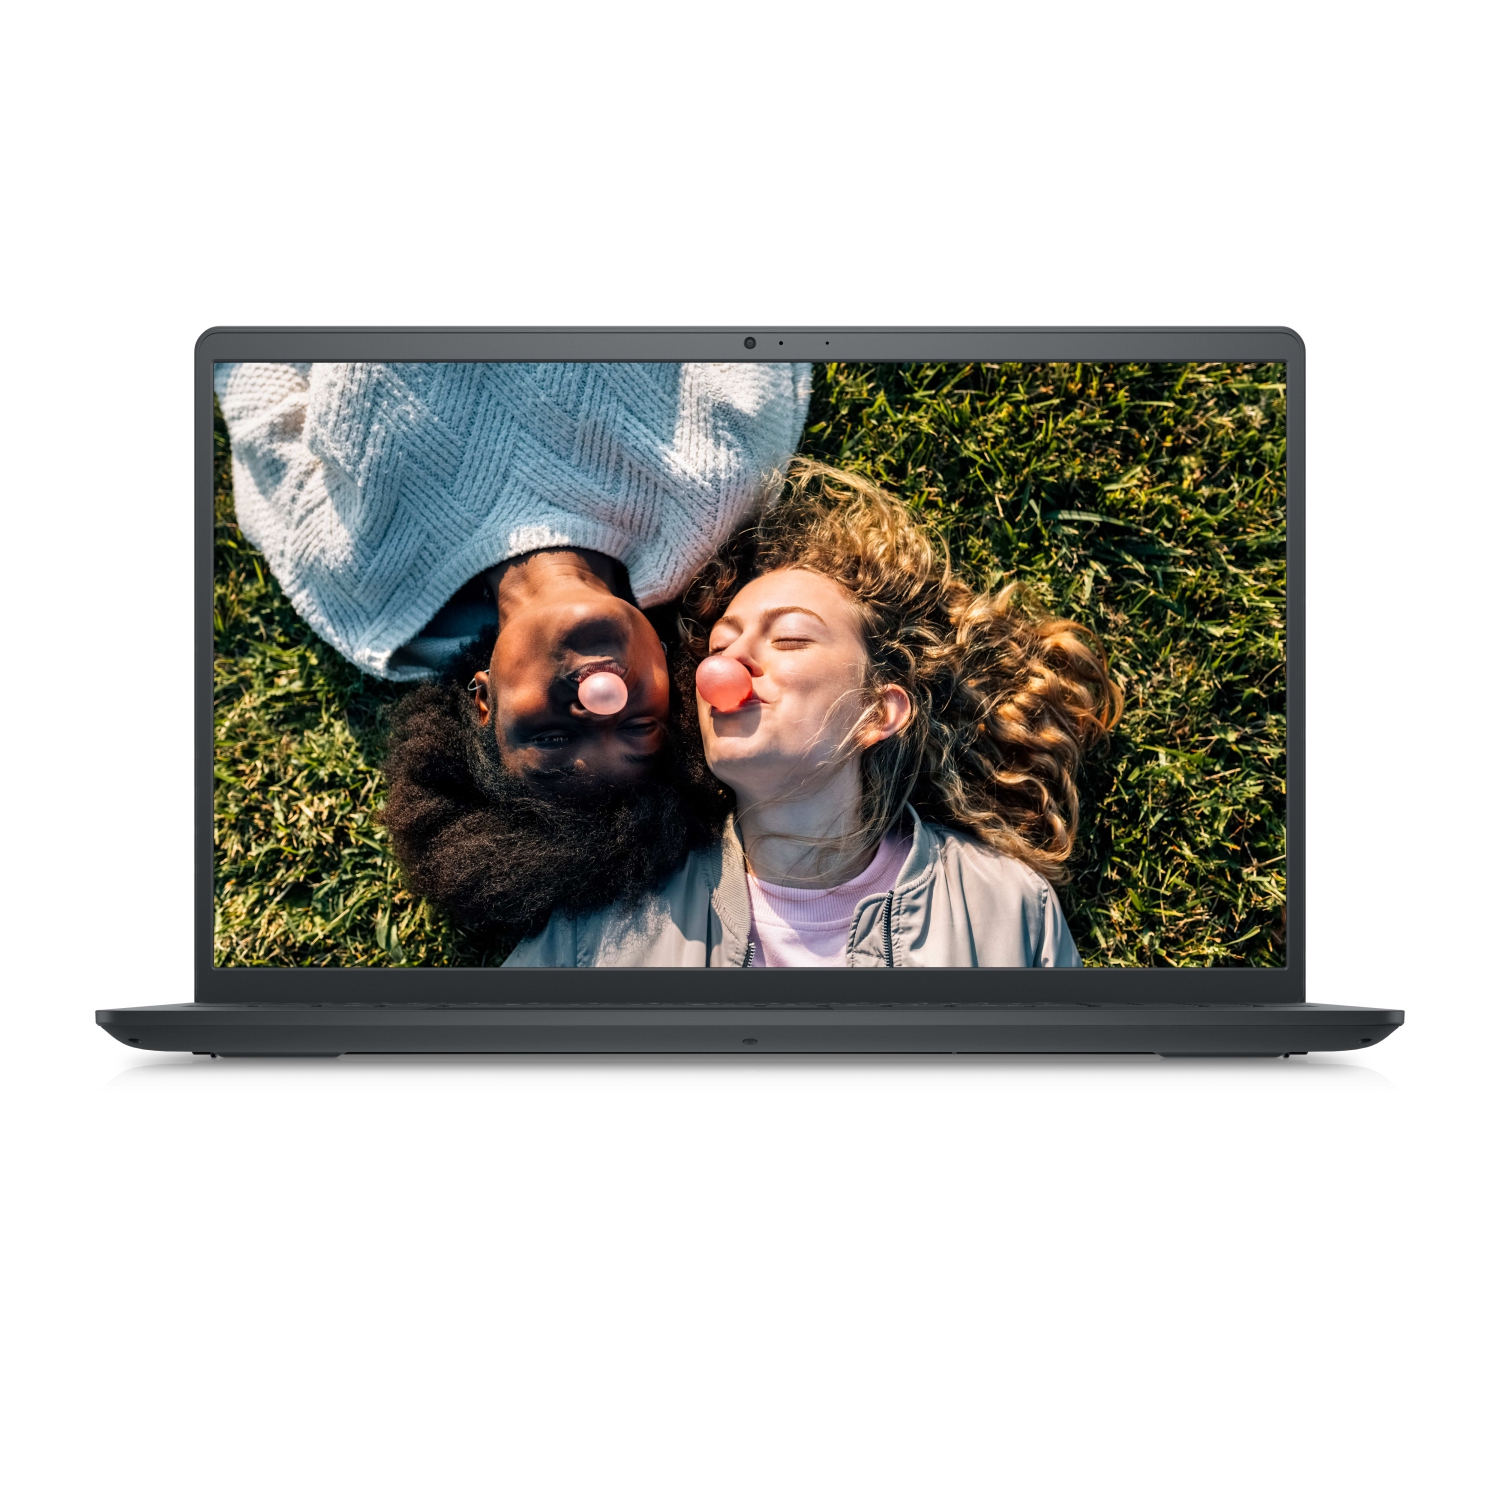 Refurbished (Excellent) – Dell Inspiron 3511 Laptop (2021) | 15.6" FHD | Core i5 - 256GB SSD - 32GB RAM | 4 Cores @ 4.2 GHz - 11th Gen CPU